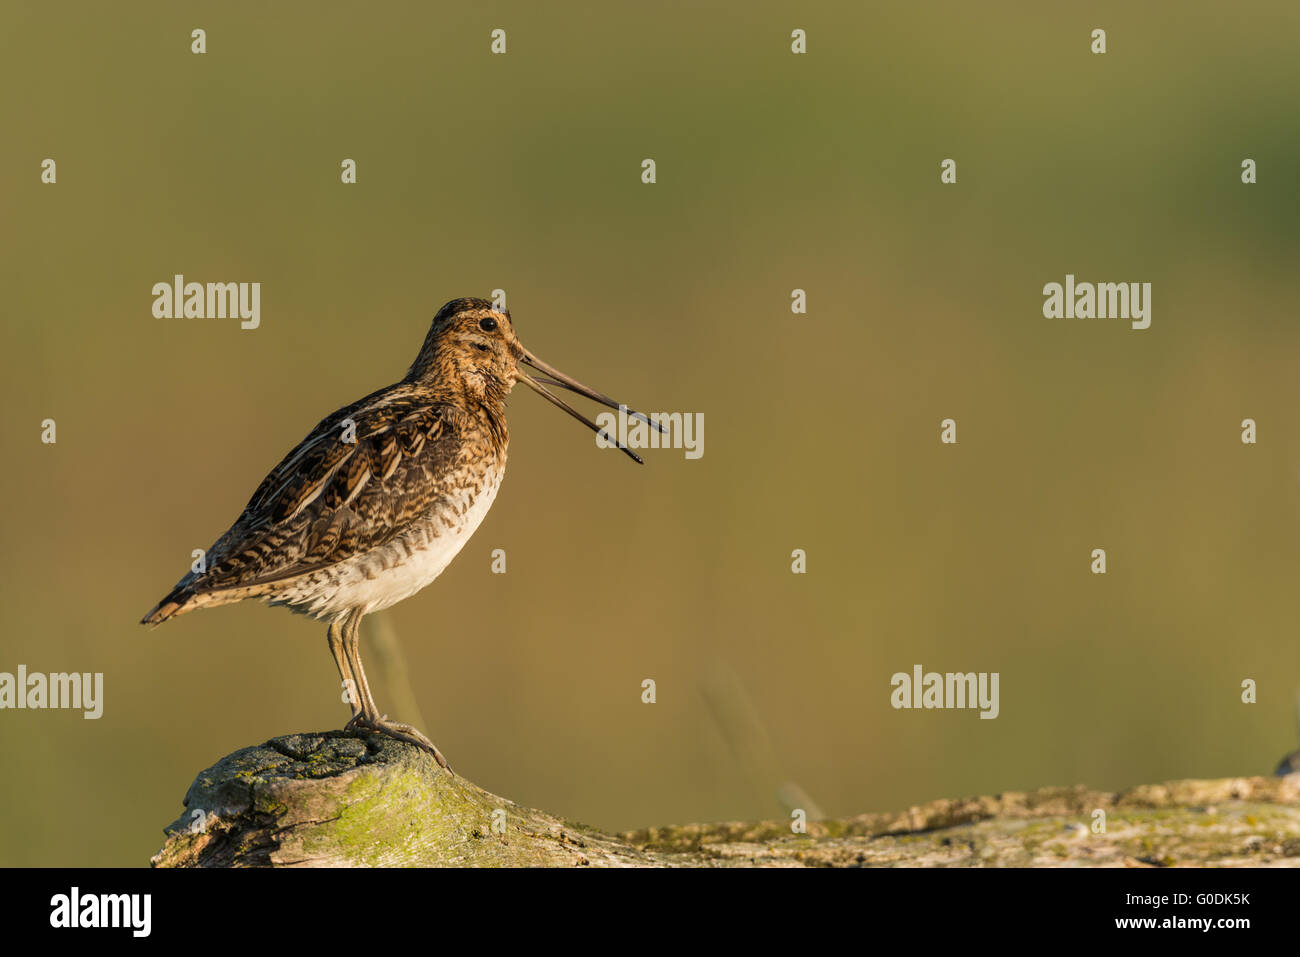 Common snipe from Germany Stock Photo